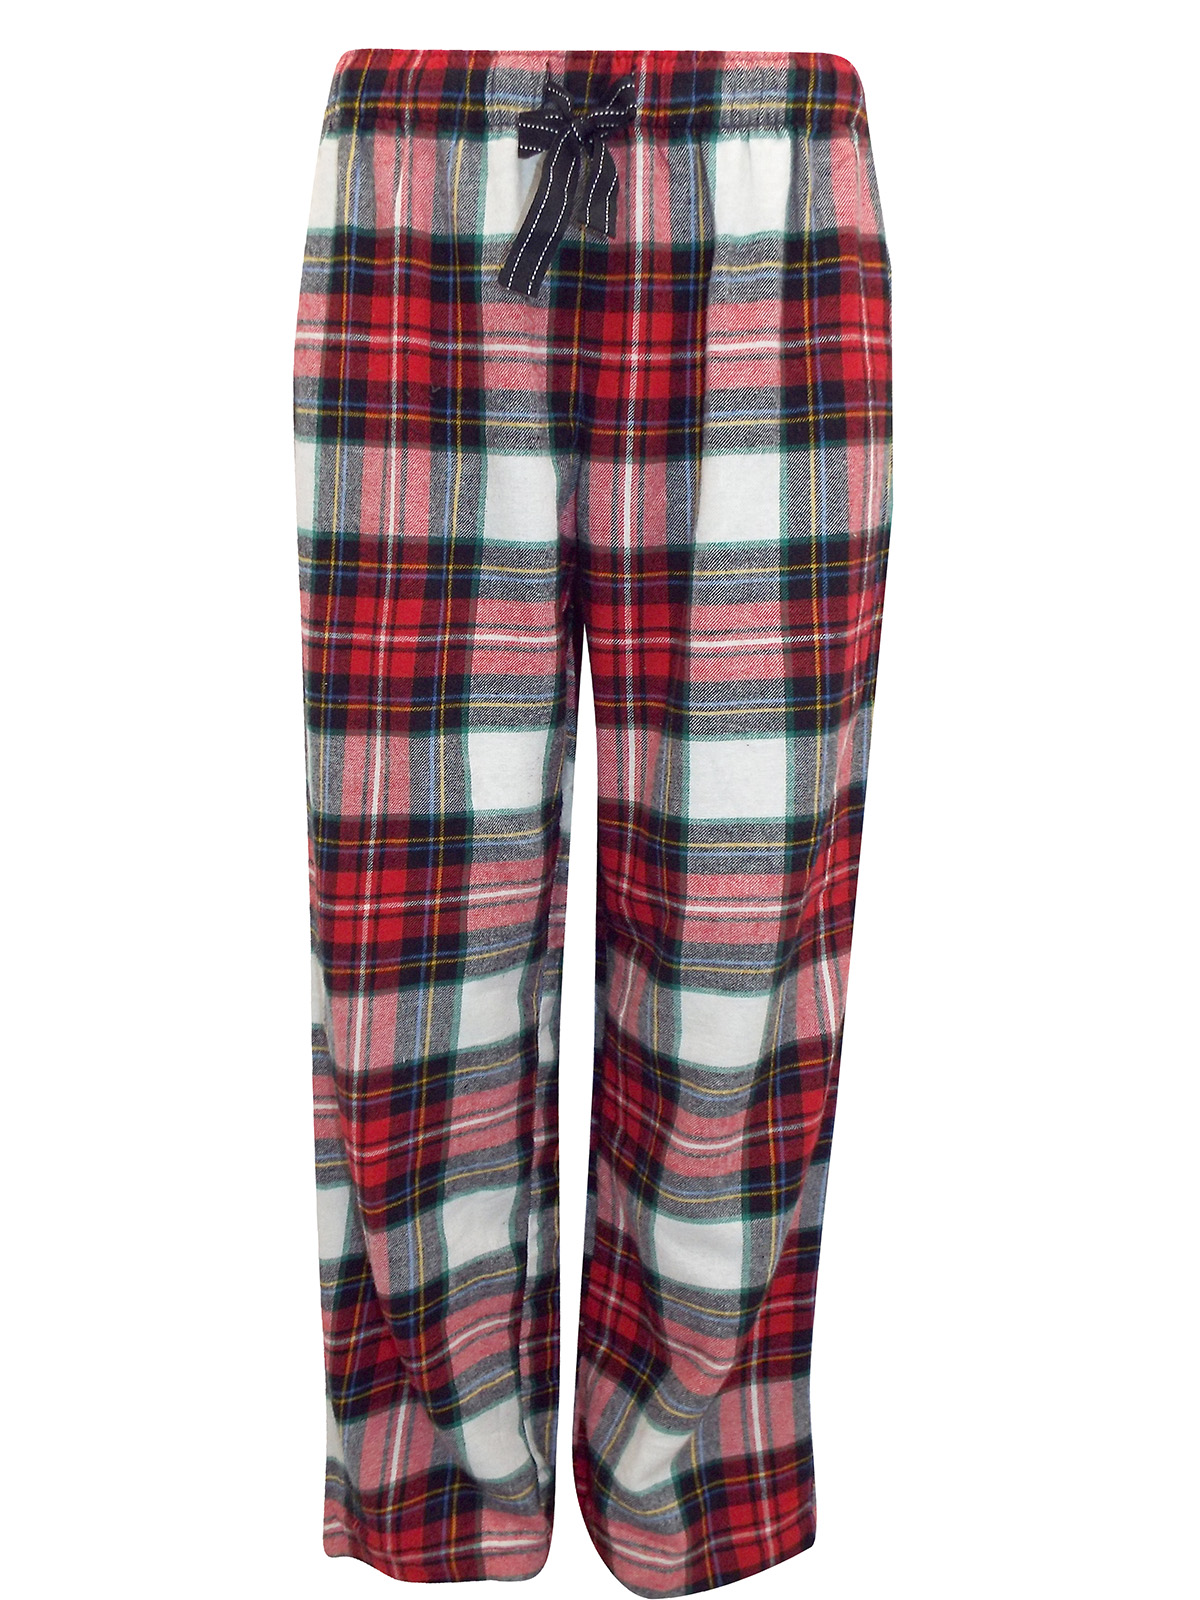 Old Navy - - Old Navy RED Pure Cotton Tartan Pyjama Bottoms - Size 4 to  14/16 (XS to L)